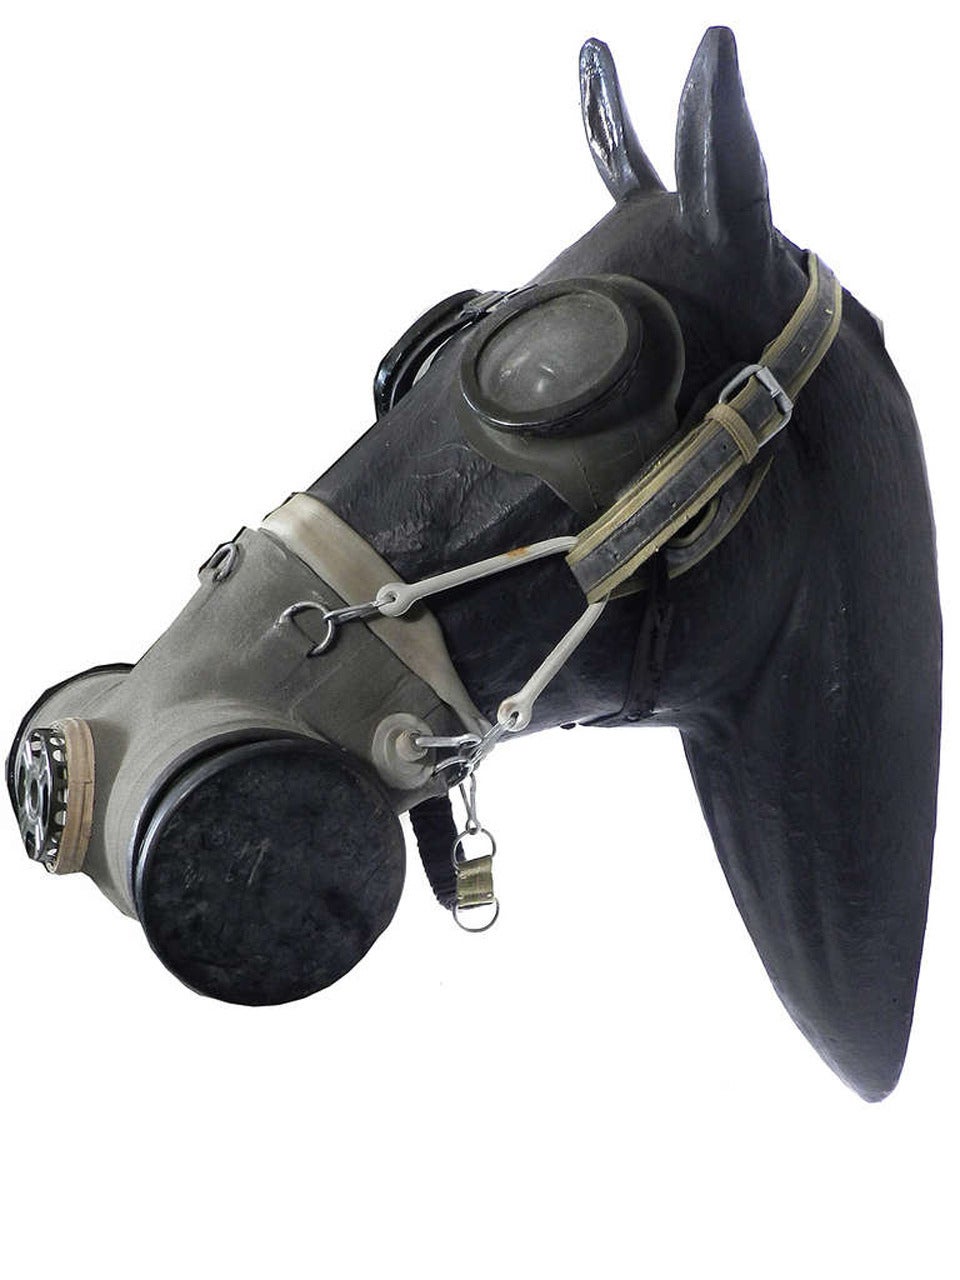 Horse gas masks were first used during World War I to protect horses from harmful chemical agents. Horses were the primary mode of transporting men and material to war zones and needed protection from irritating chemicals like chlorine and phosgene,